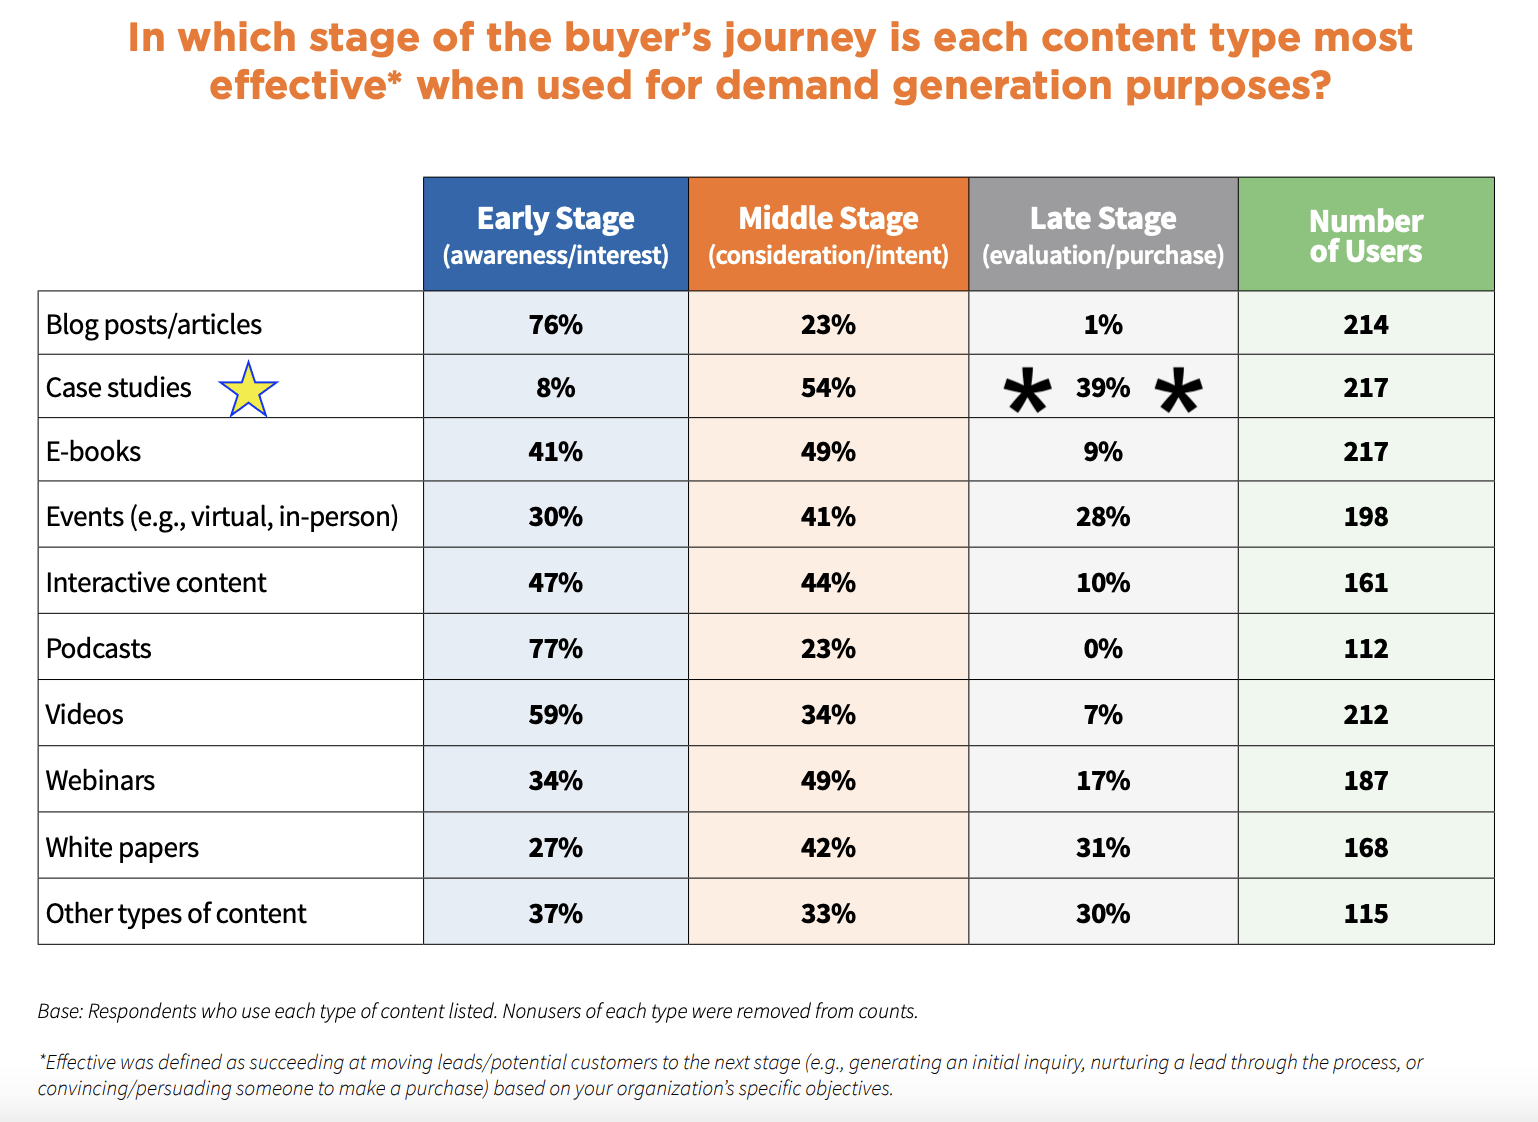 39% of marketers say saas case studies are most effective for demand generation